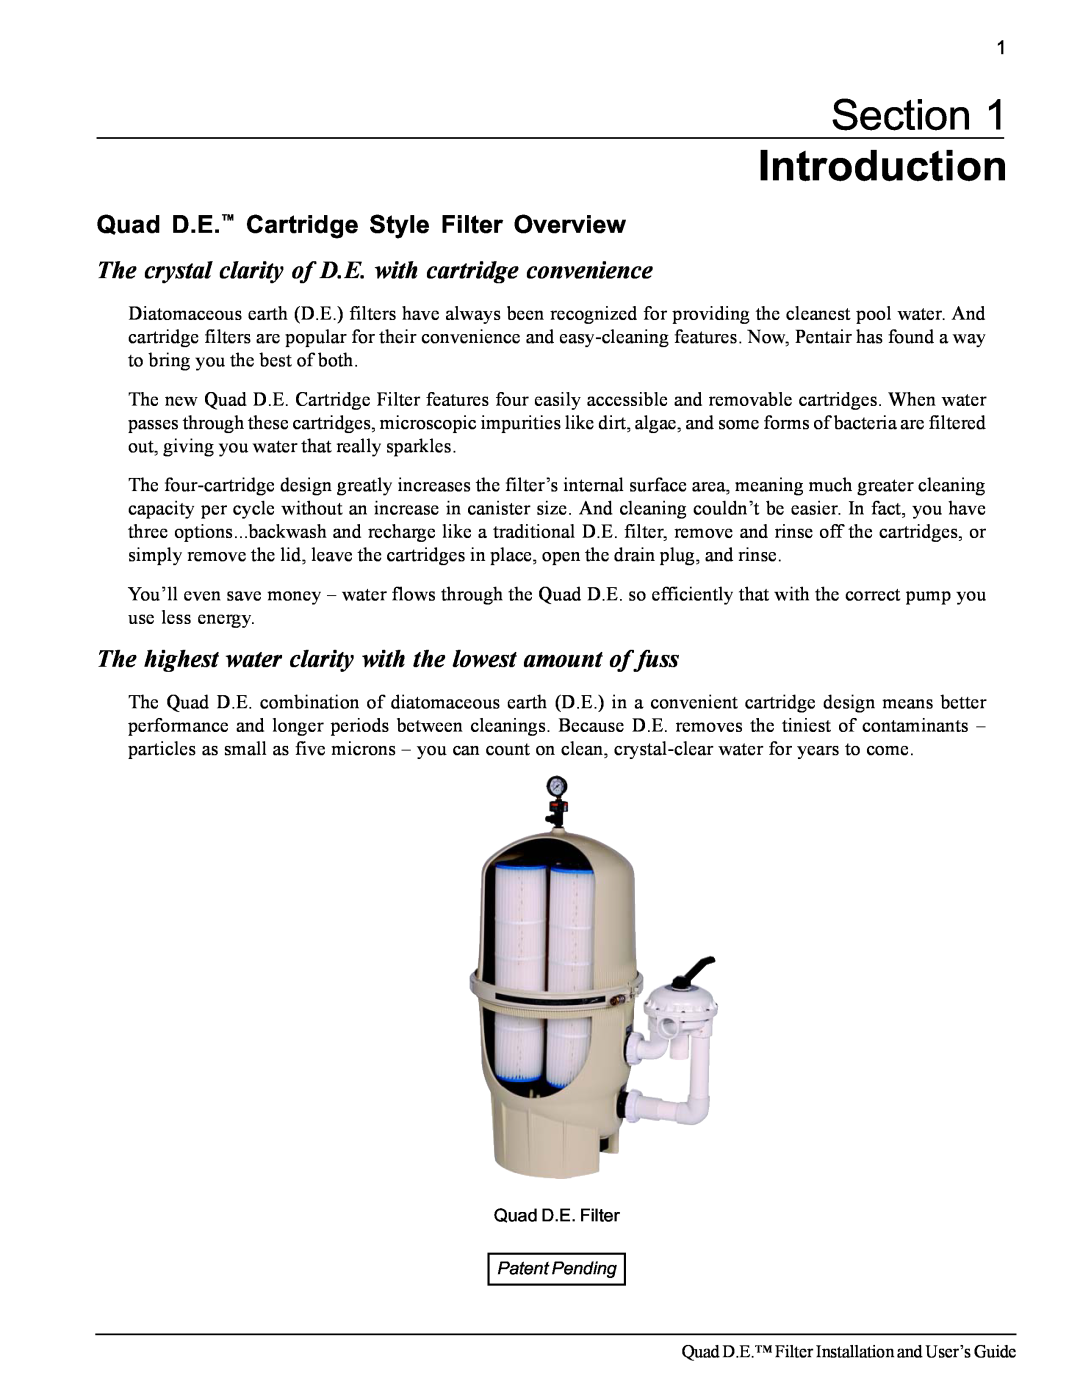 Pentair important safety instructions Section Introduction, Quad D.E. Cartridge Style Filter Overview 